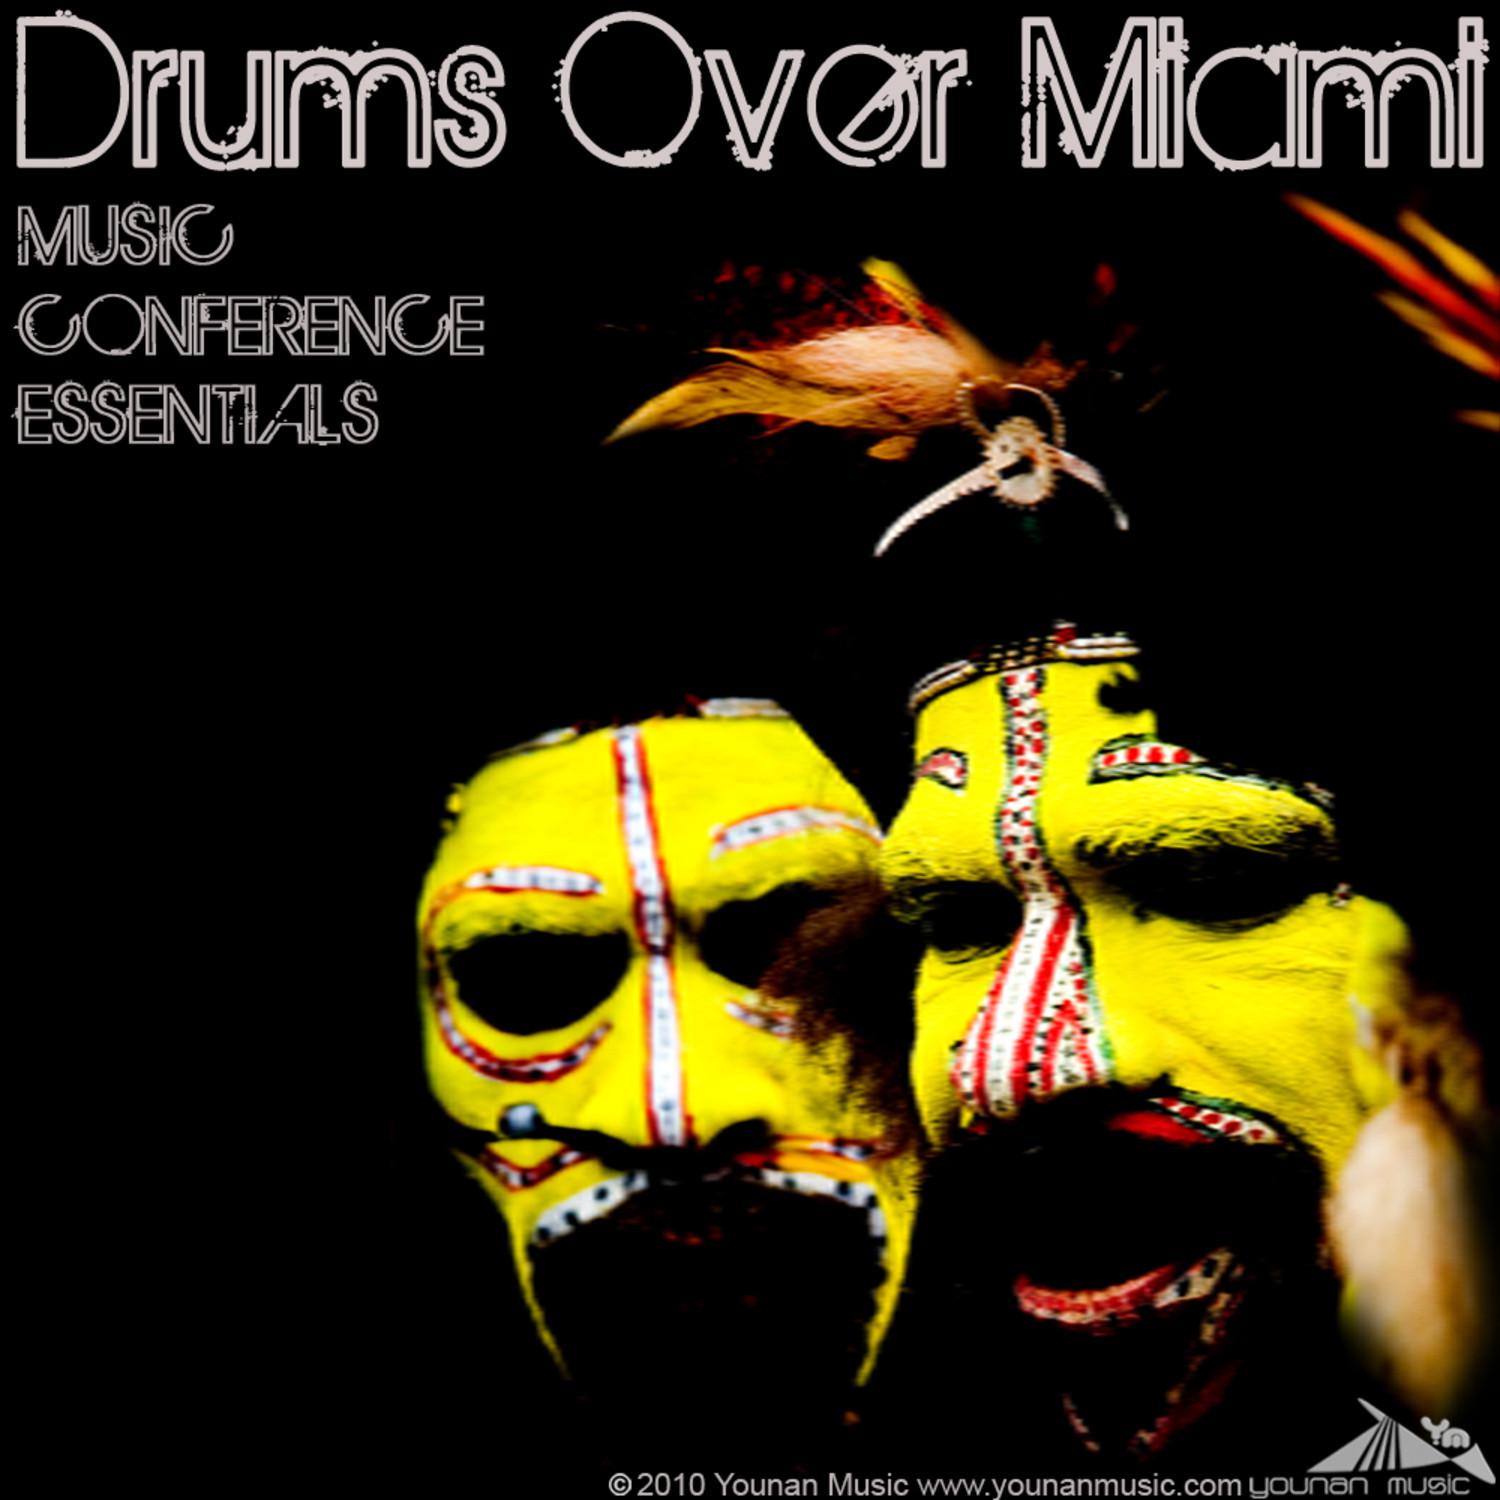 Drums Over Miami (Music Conference Essentials)